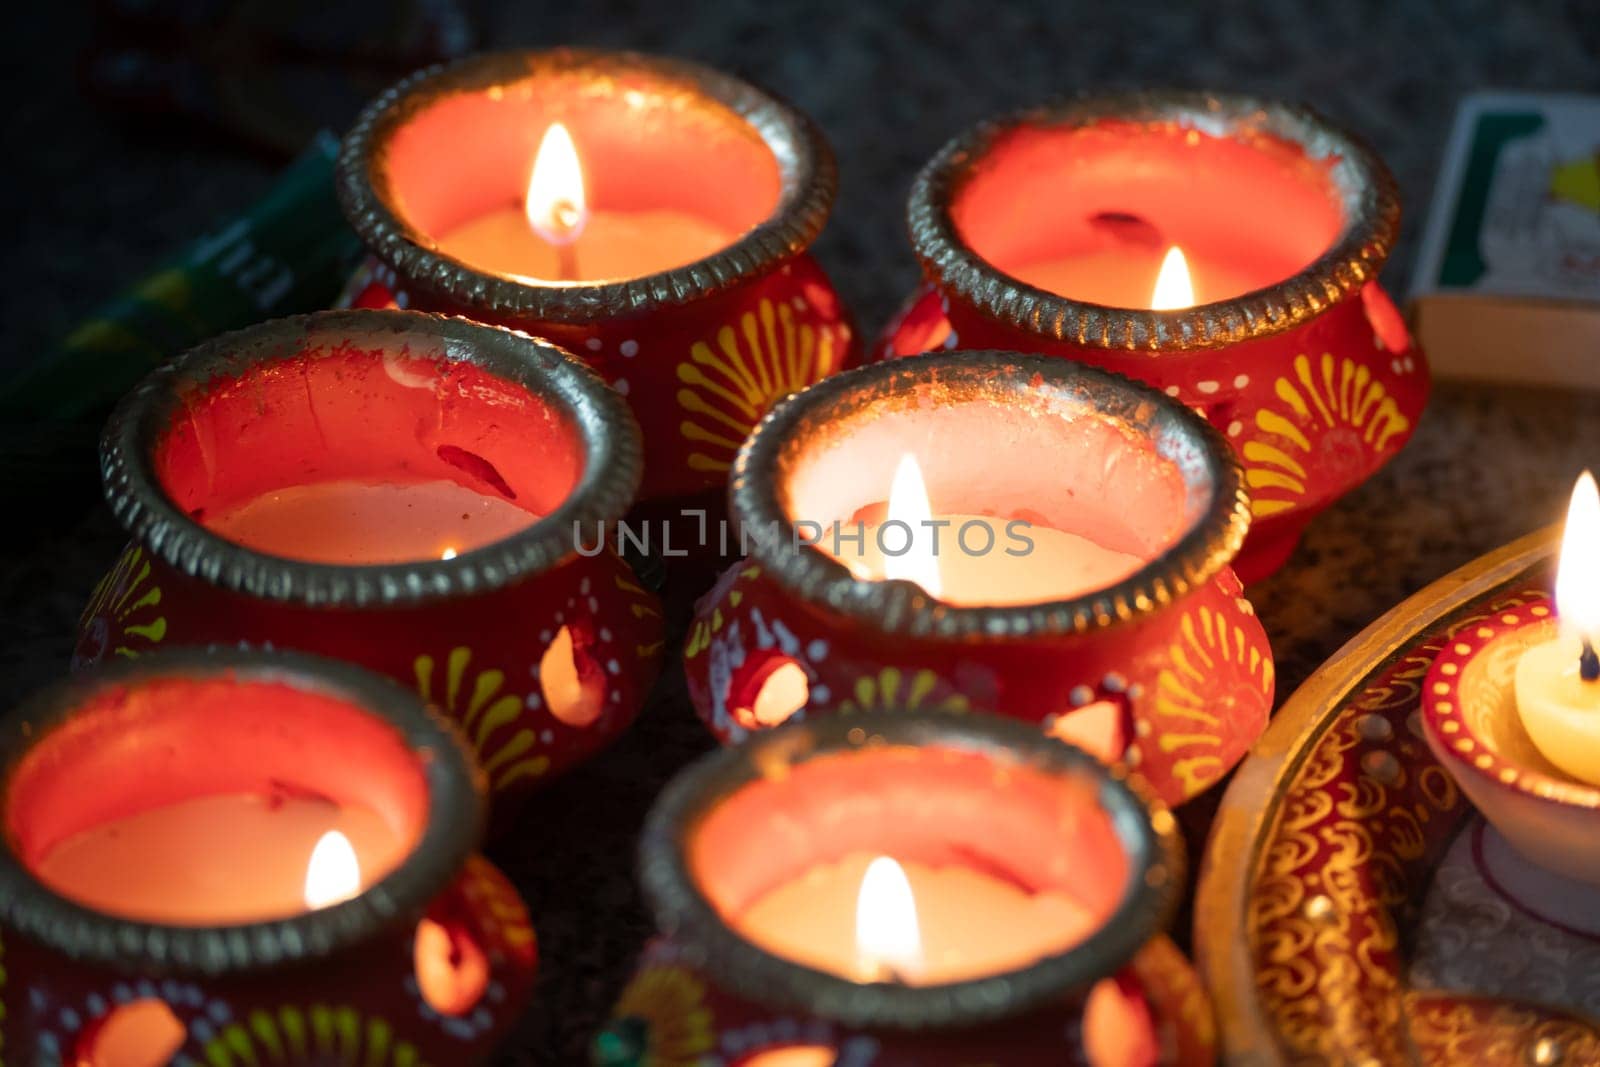 beautifully decorated diyas lit on the eve of diwali and the Ram temple Pran Pratishtha consecration celebrated across India and globally by hindu devotees